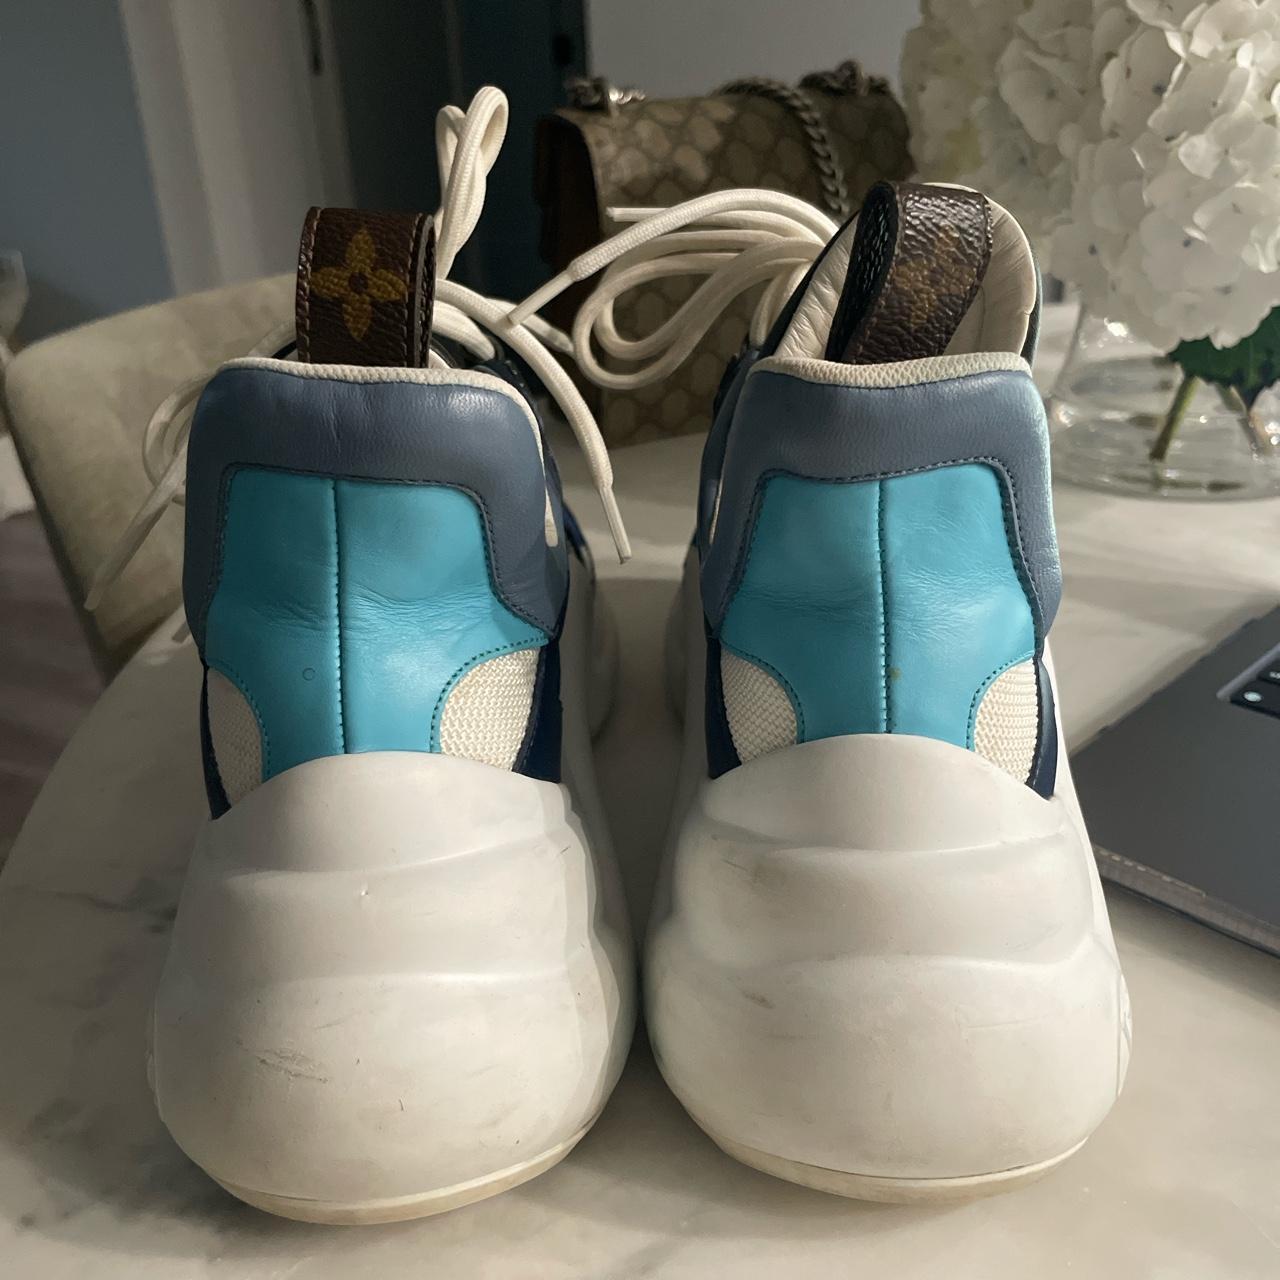 LOUIS VITTON shoes on sale. Size 7.5 worn only twice - Depop